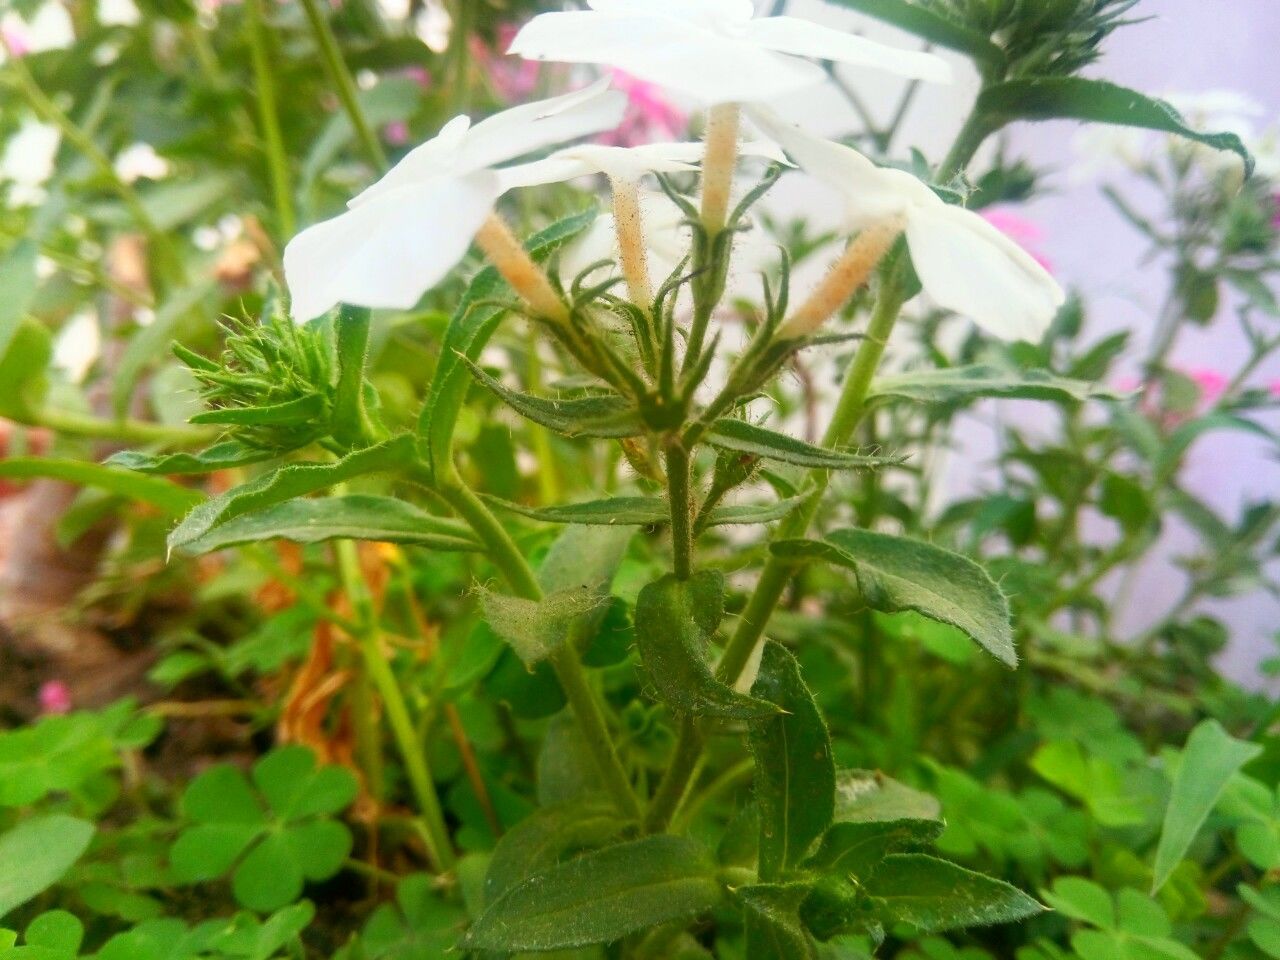 CLOSE-UP OF FRESH GREEN PLANT